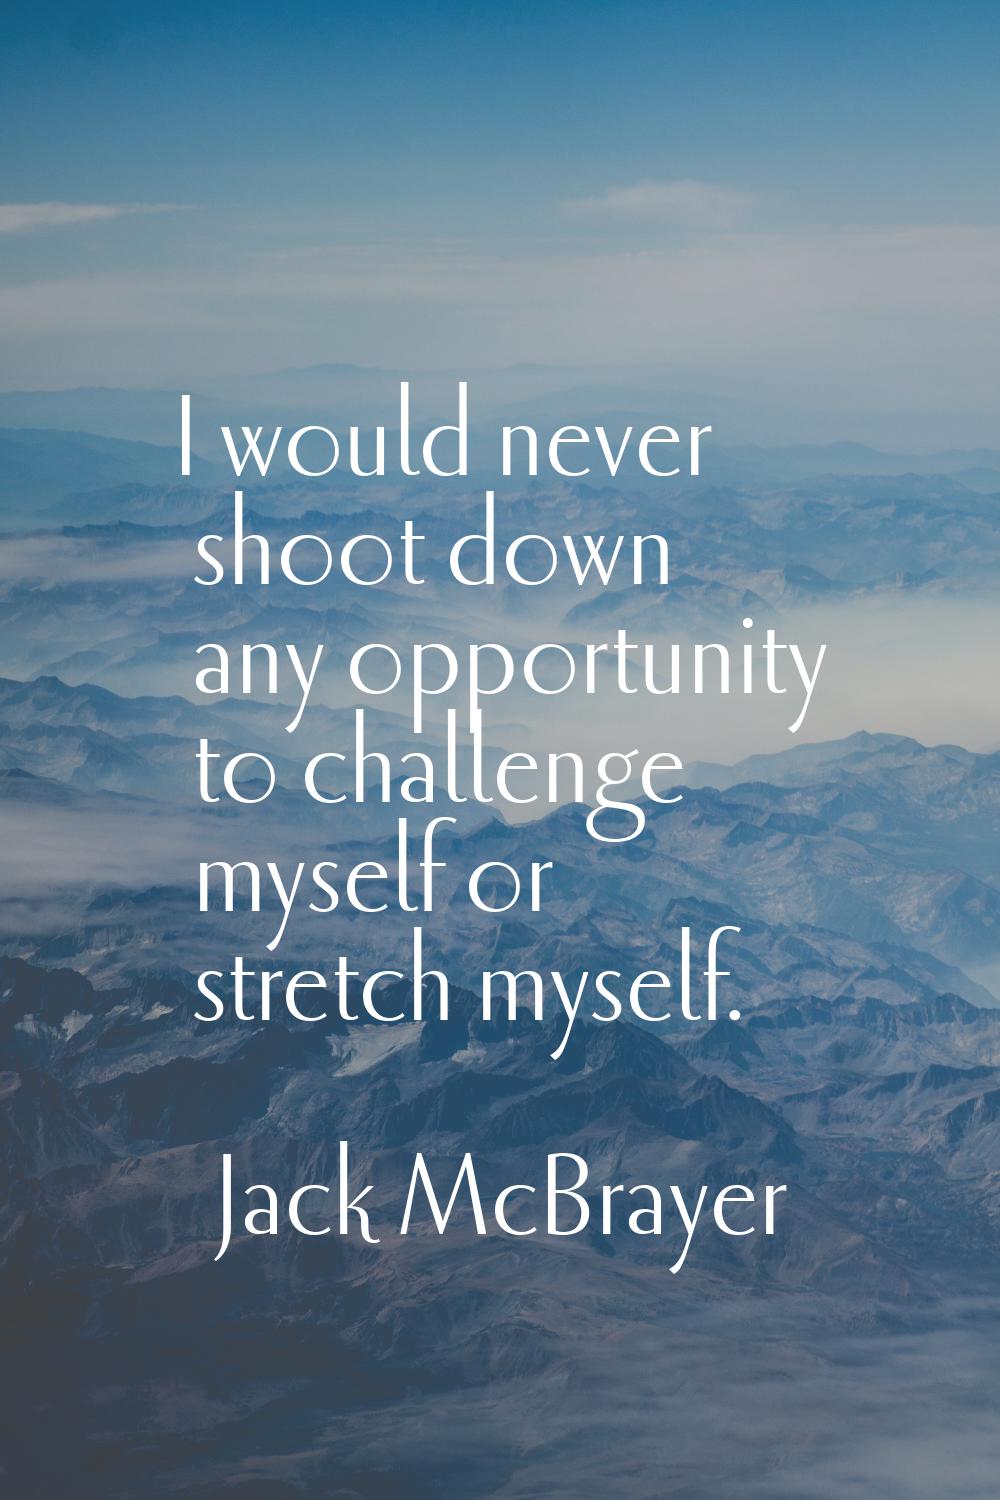 I would never shoot down any opportunity to challenge myself or stretch myself.